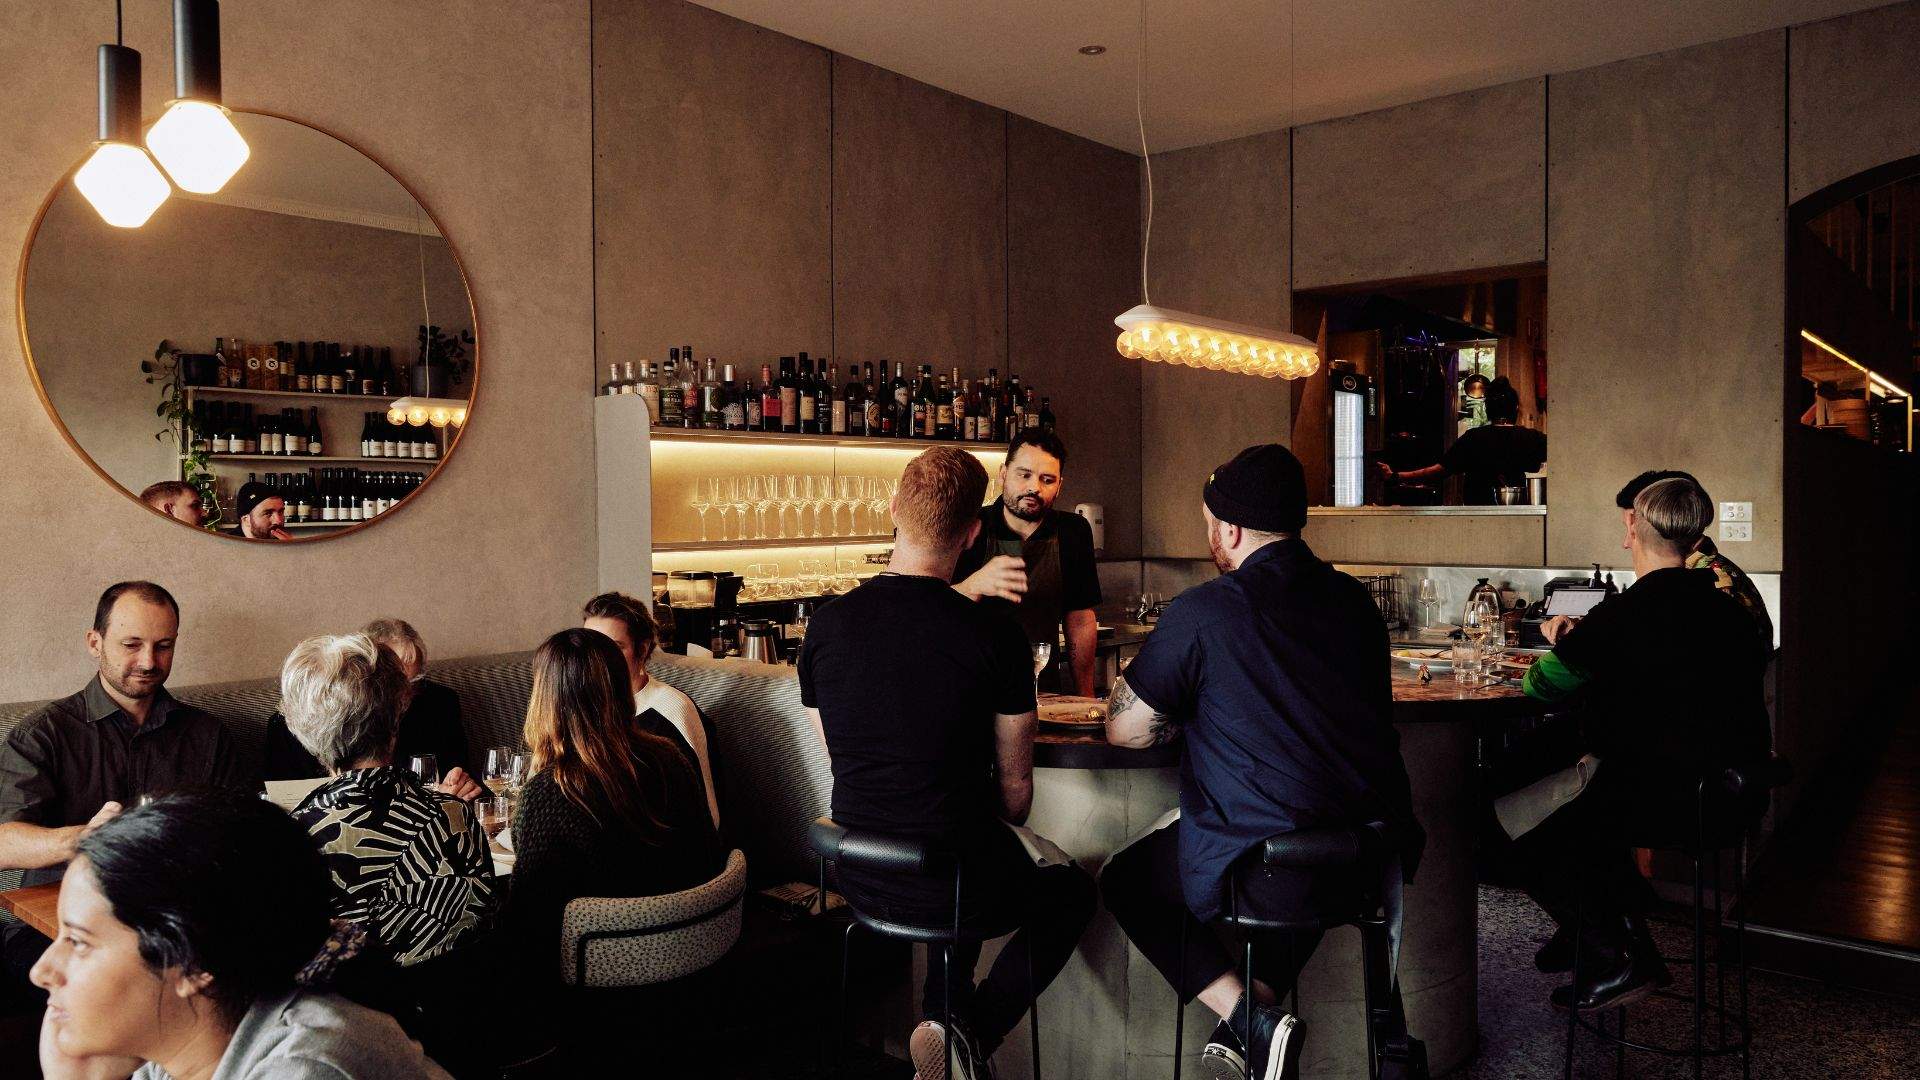 Etta wine bar and restaurant - one of the best restaurants in Melbourne. And one of the best bars in Melbourne.